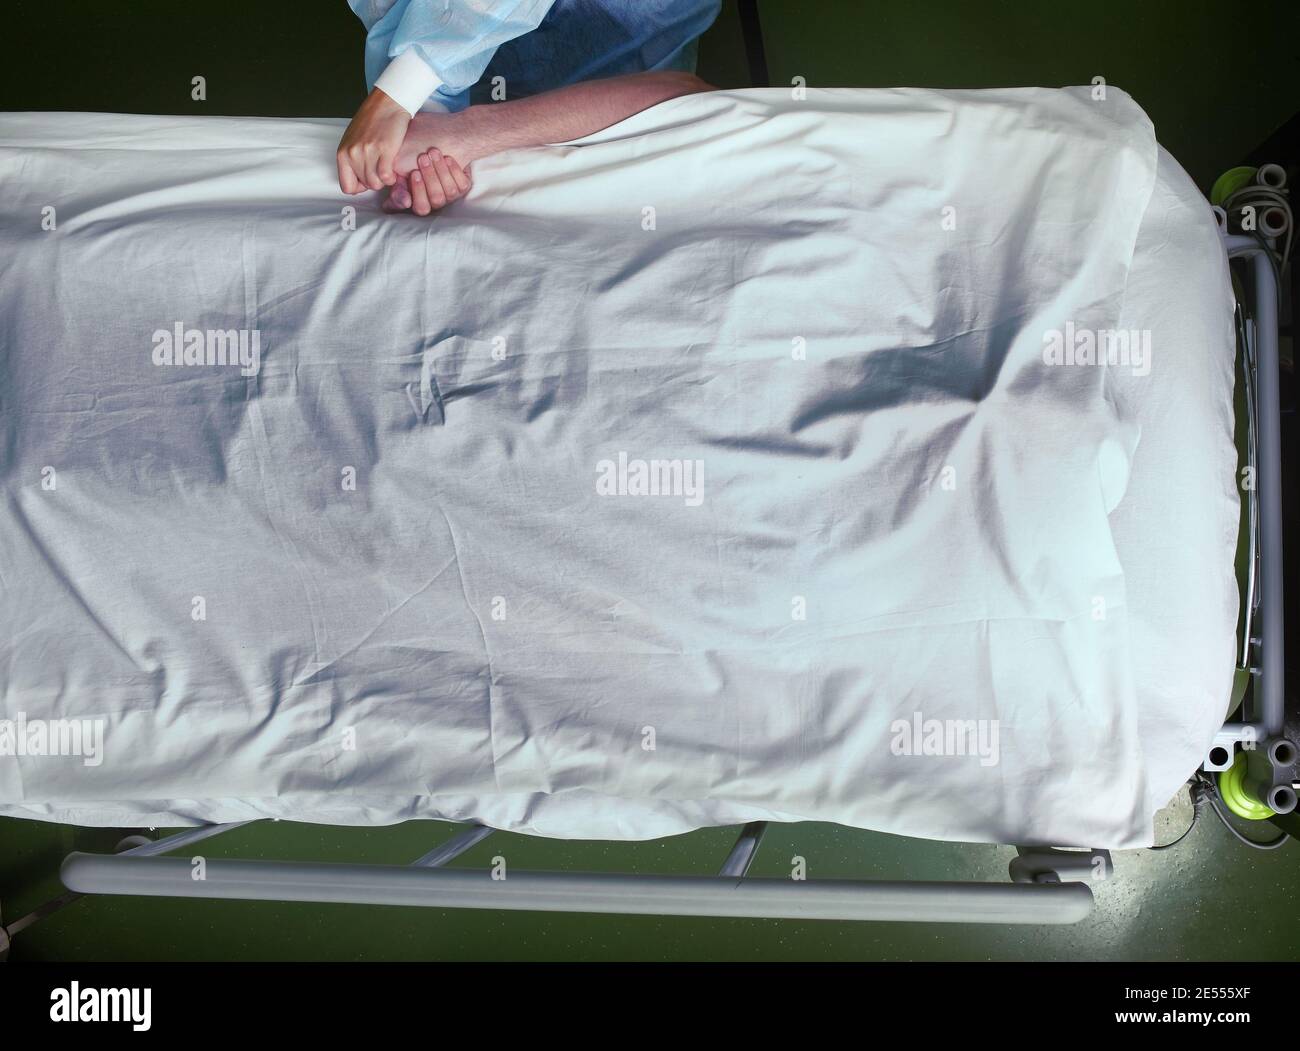 Farewell on the hospital bed. Stock Photo